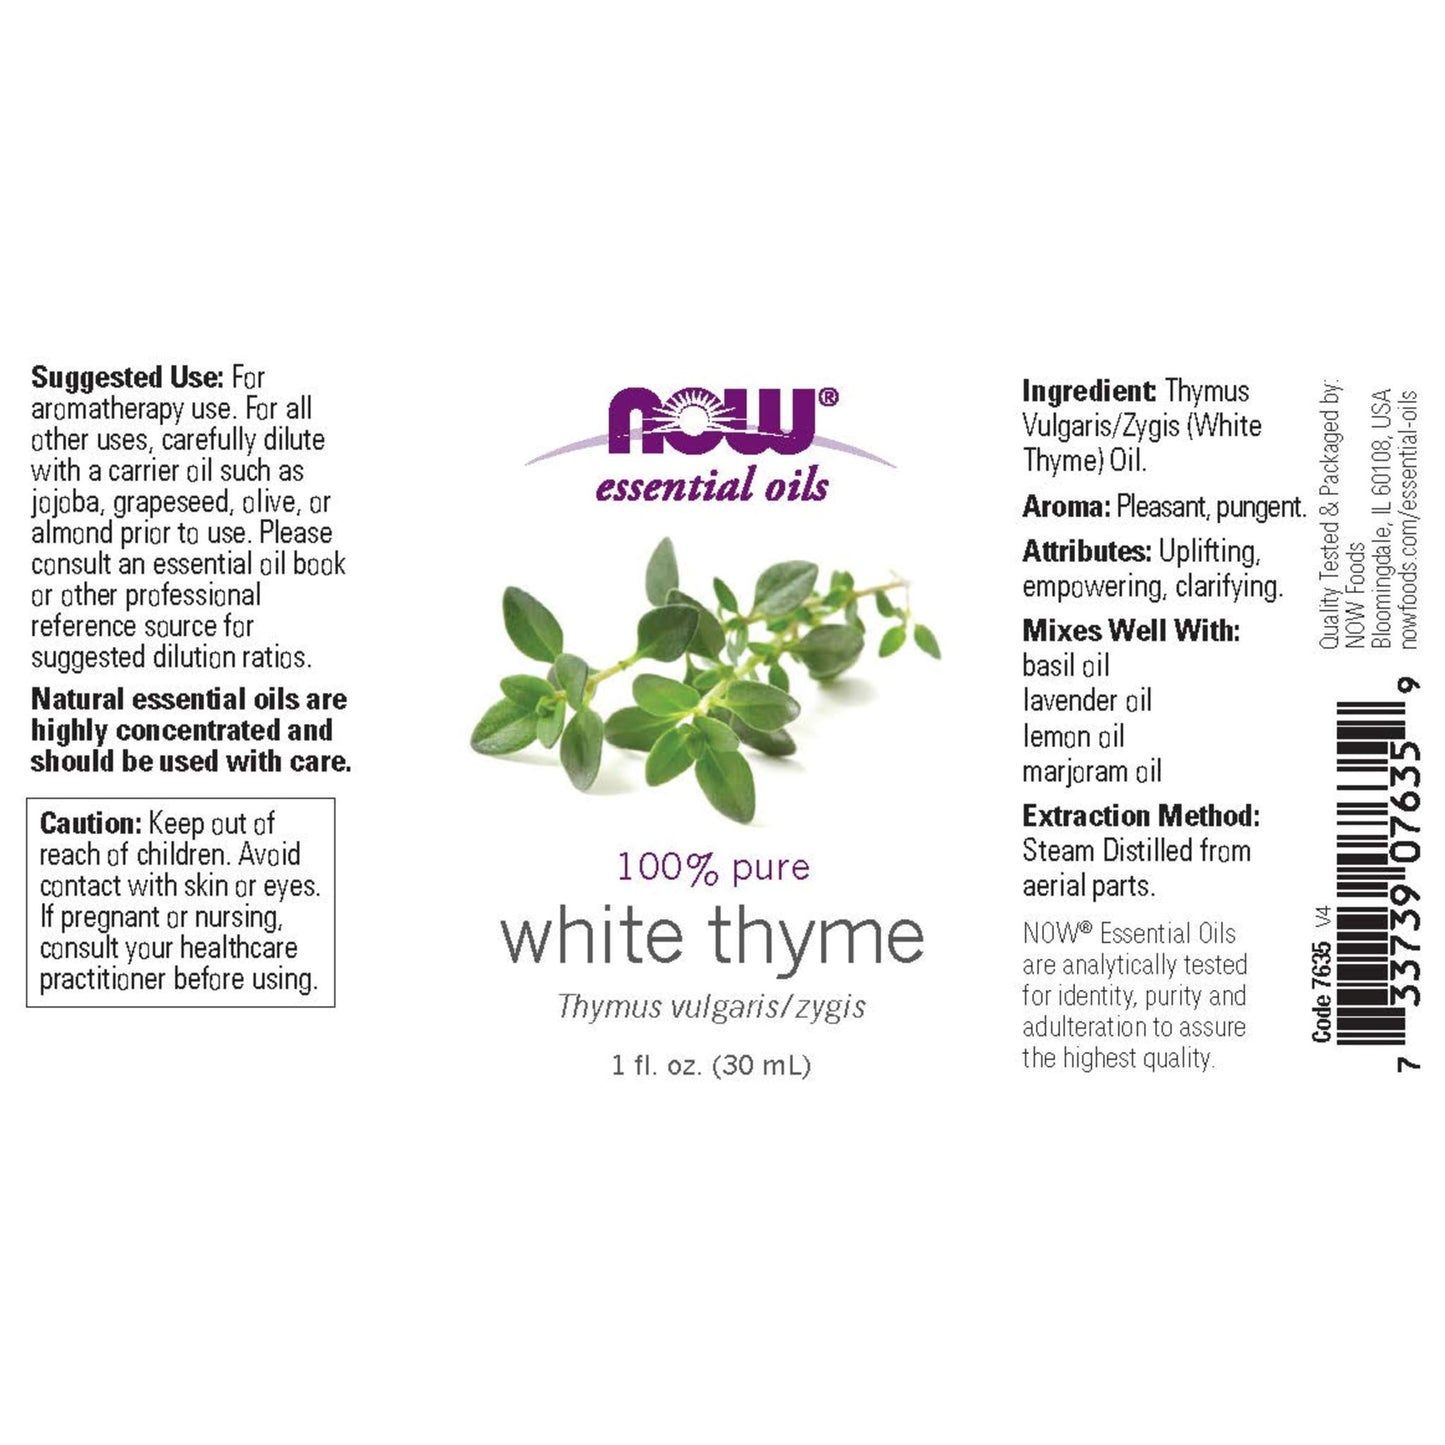 NOW Foods Thyme Essential Oil